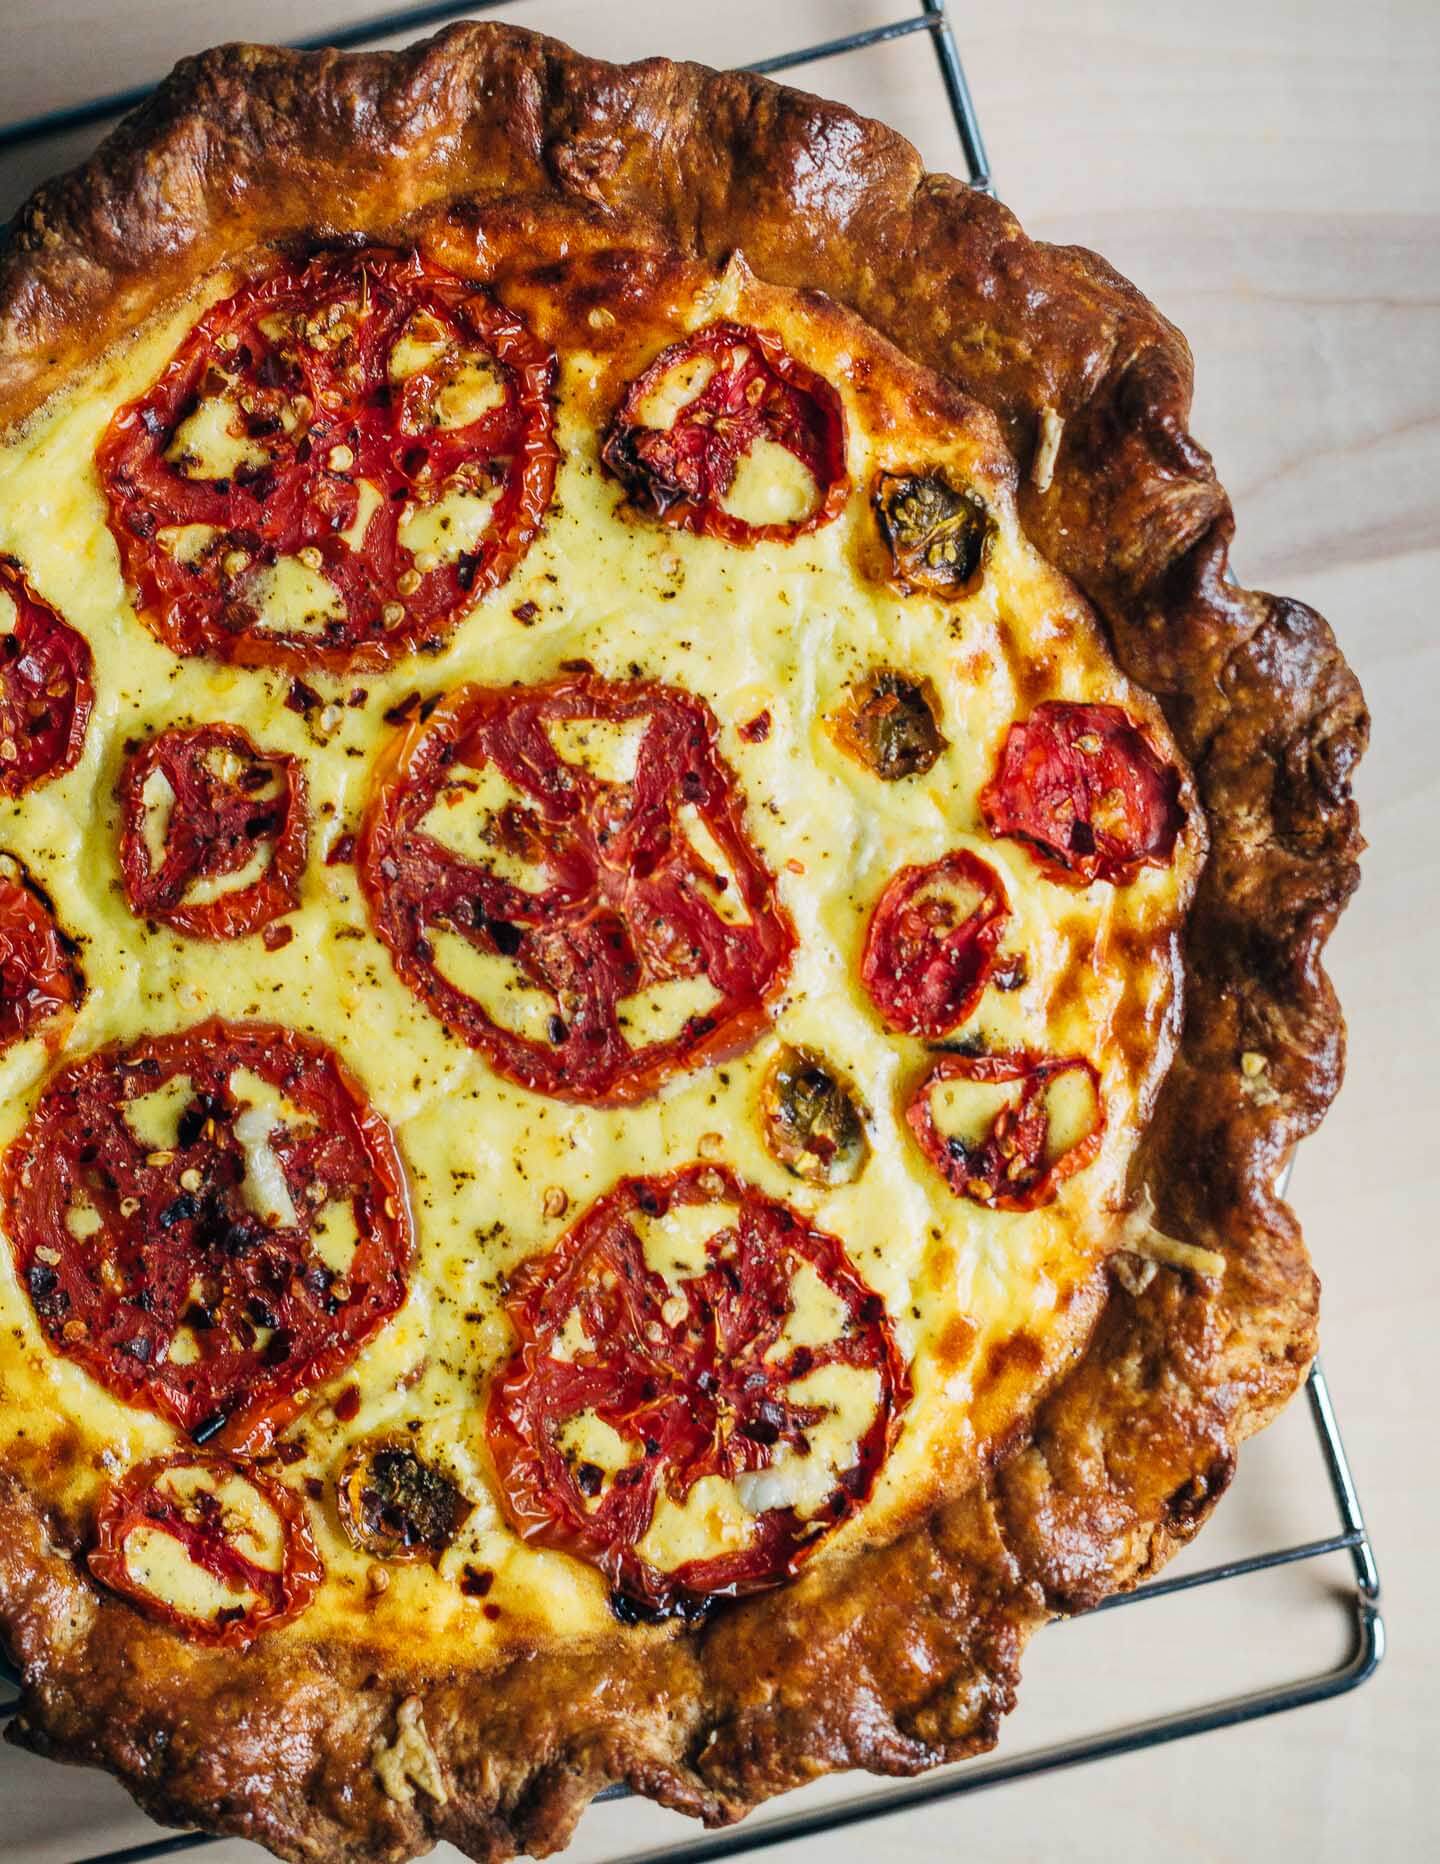 A deeply savory tomato pie that harnesses the acidic, faintly sweet edge of perfectly ripe summer tomatoes. There’s also a flaky whole wheat crust, eggs with bright orange yolks, and handfuls of sharp cheddar. 